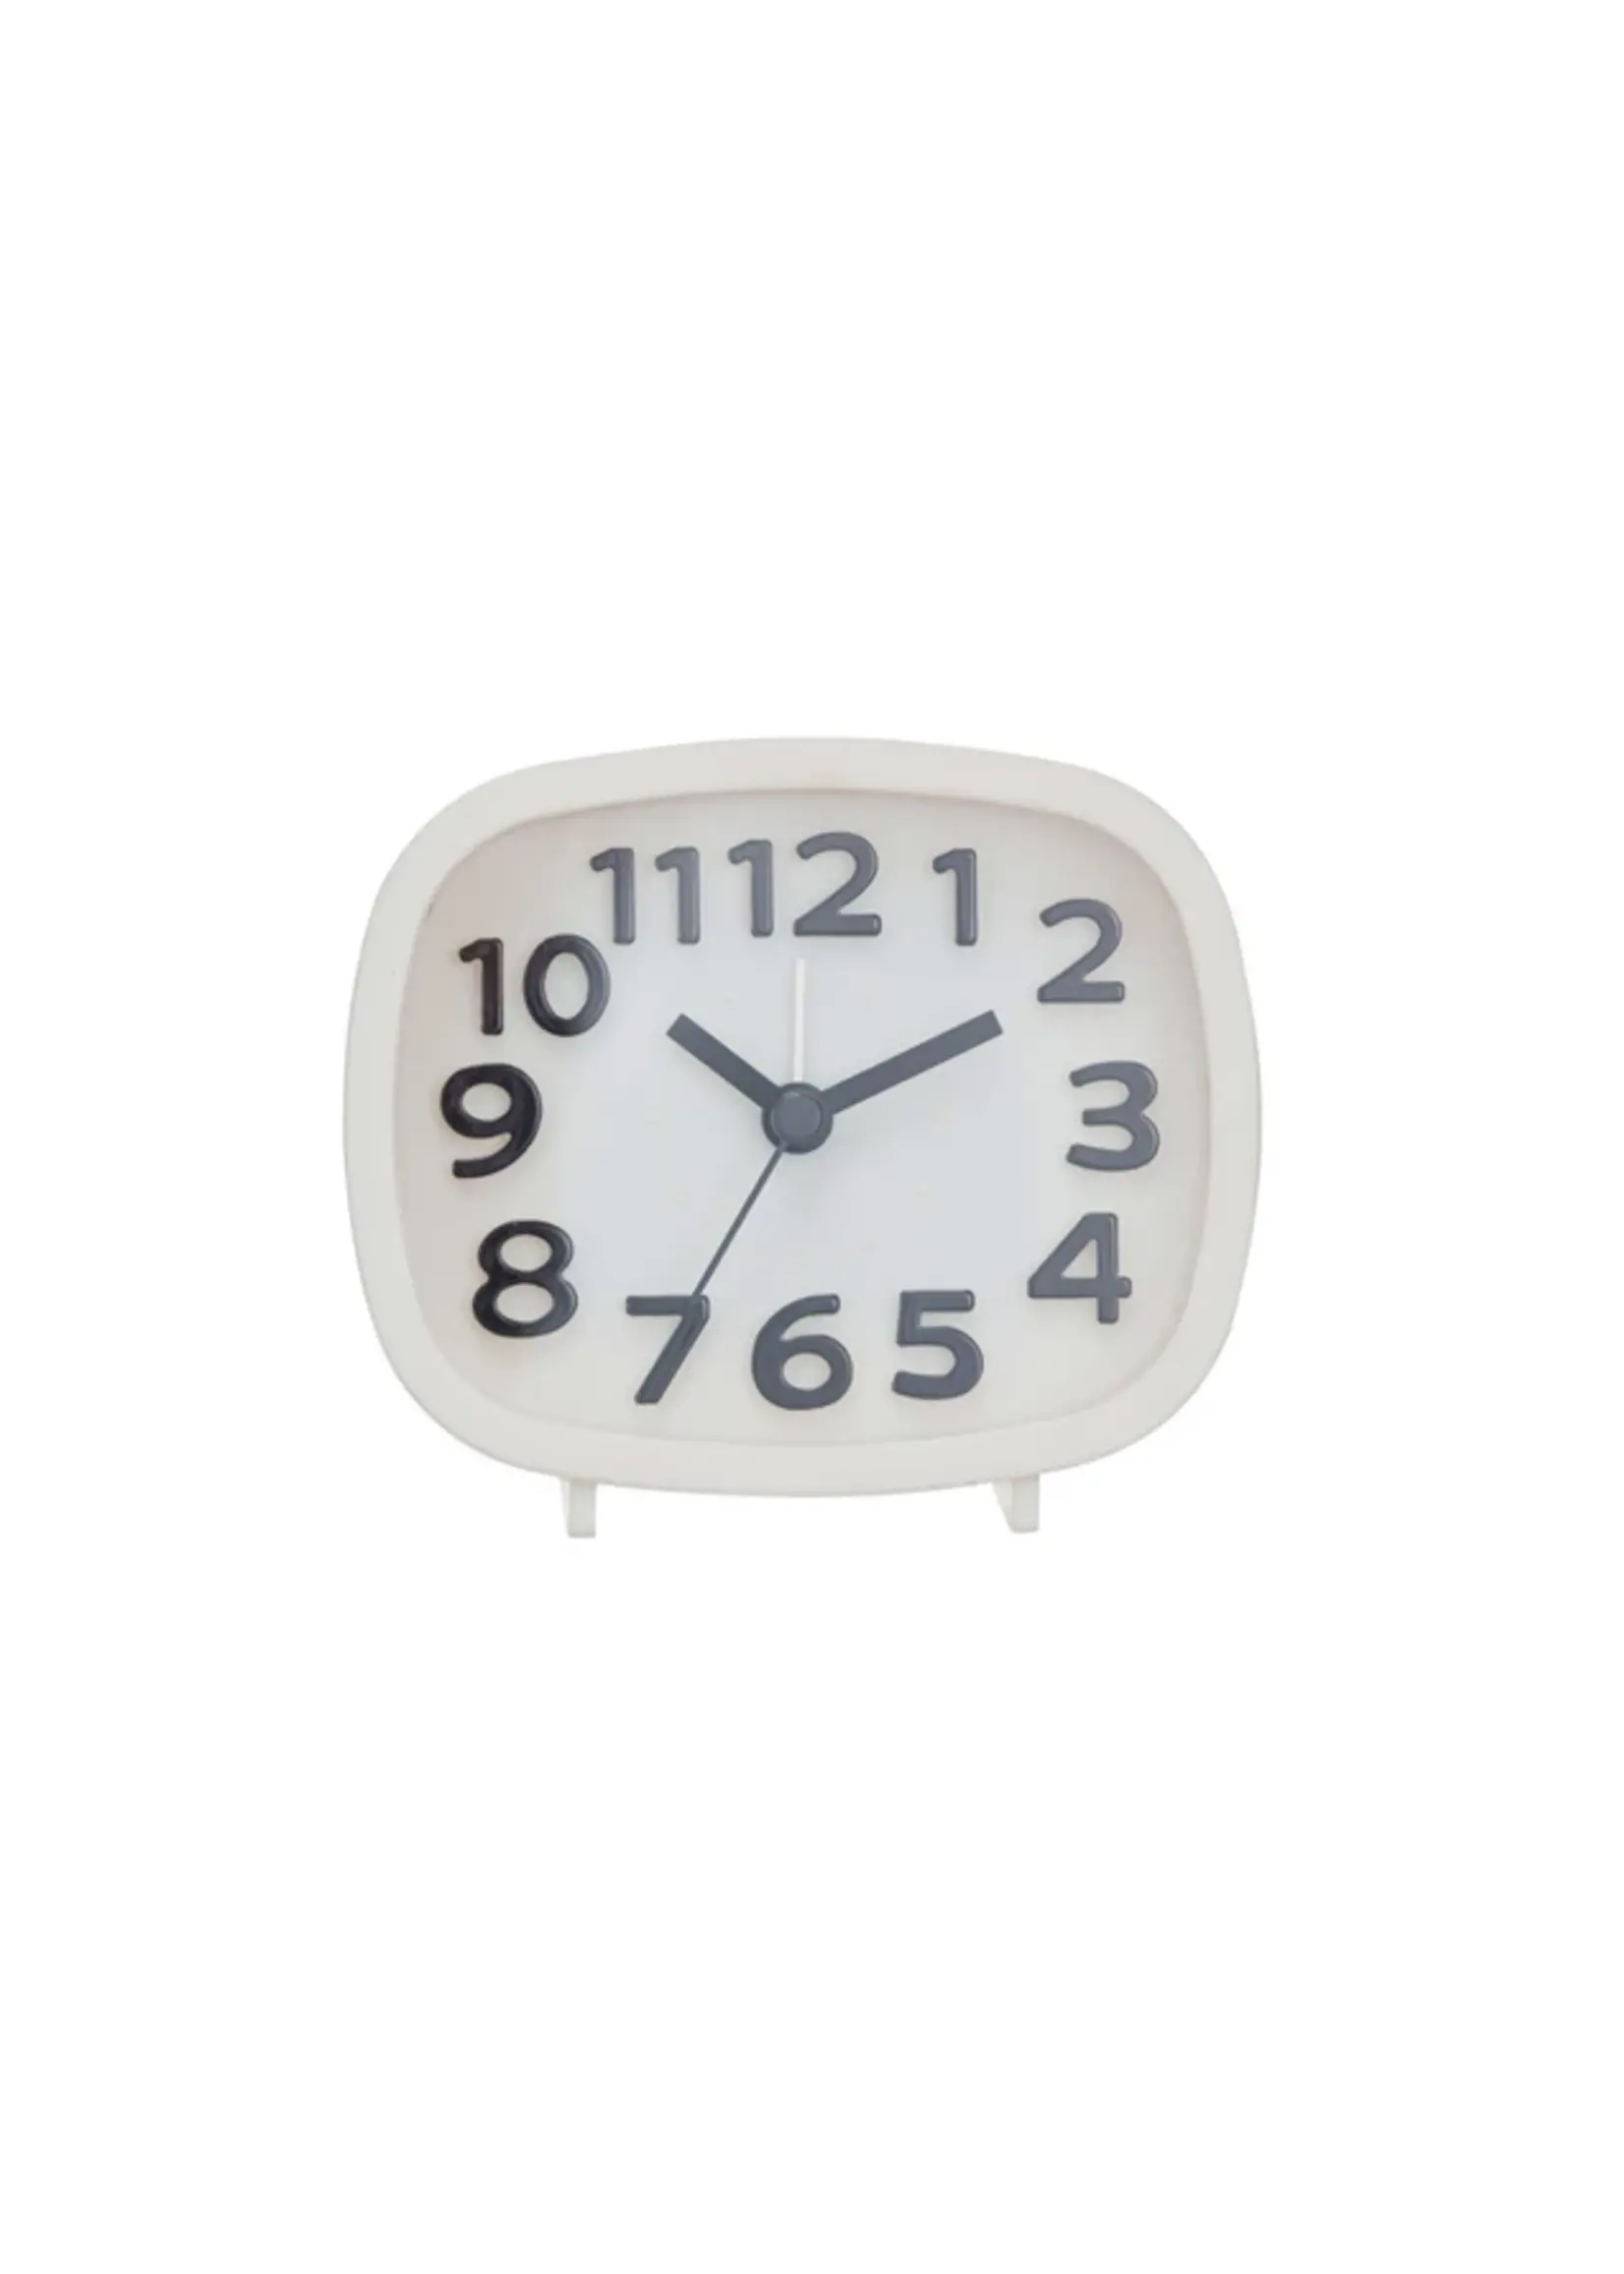 Footed Alarm/Table Clock